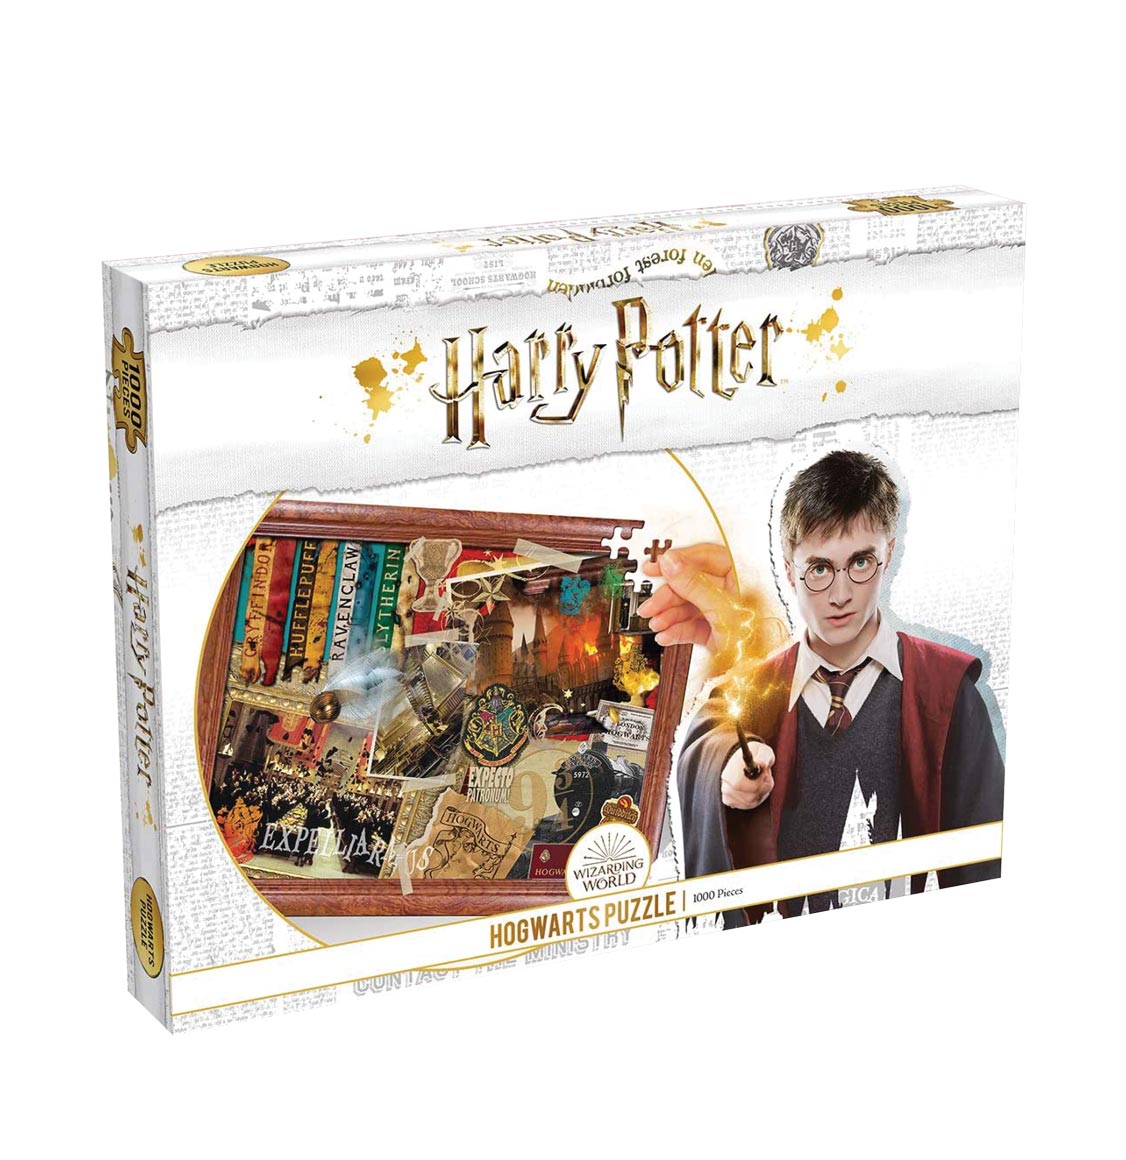 Winning Moves Harry Potter Hogwarts Puzzle Jigsaw 1000 Pieces